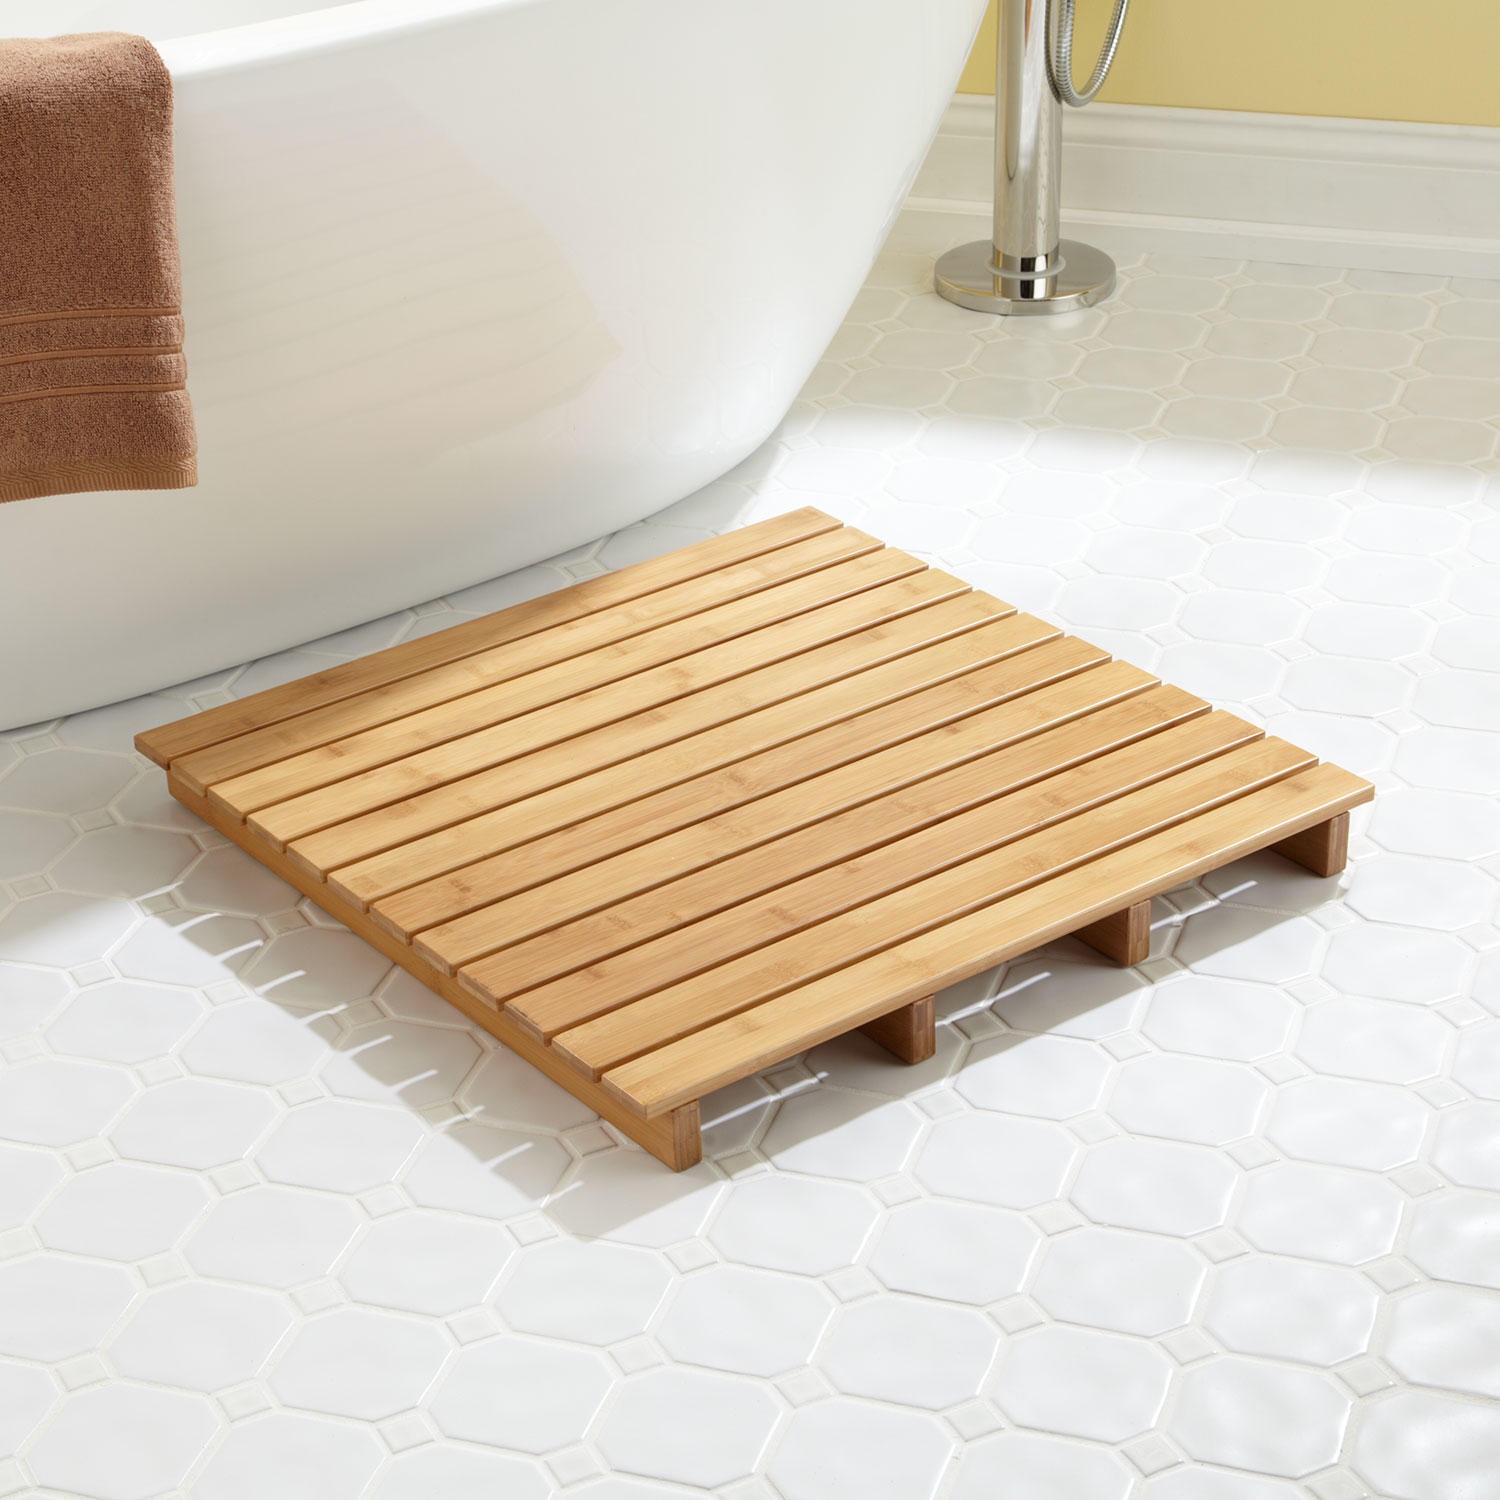 bathroom mat ... square bath mat makes a smooth and minimalist landing spot after NMHLWQH